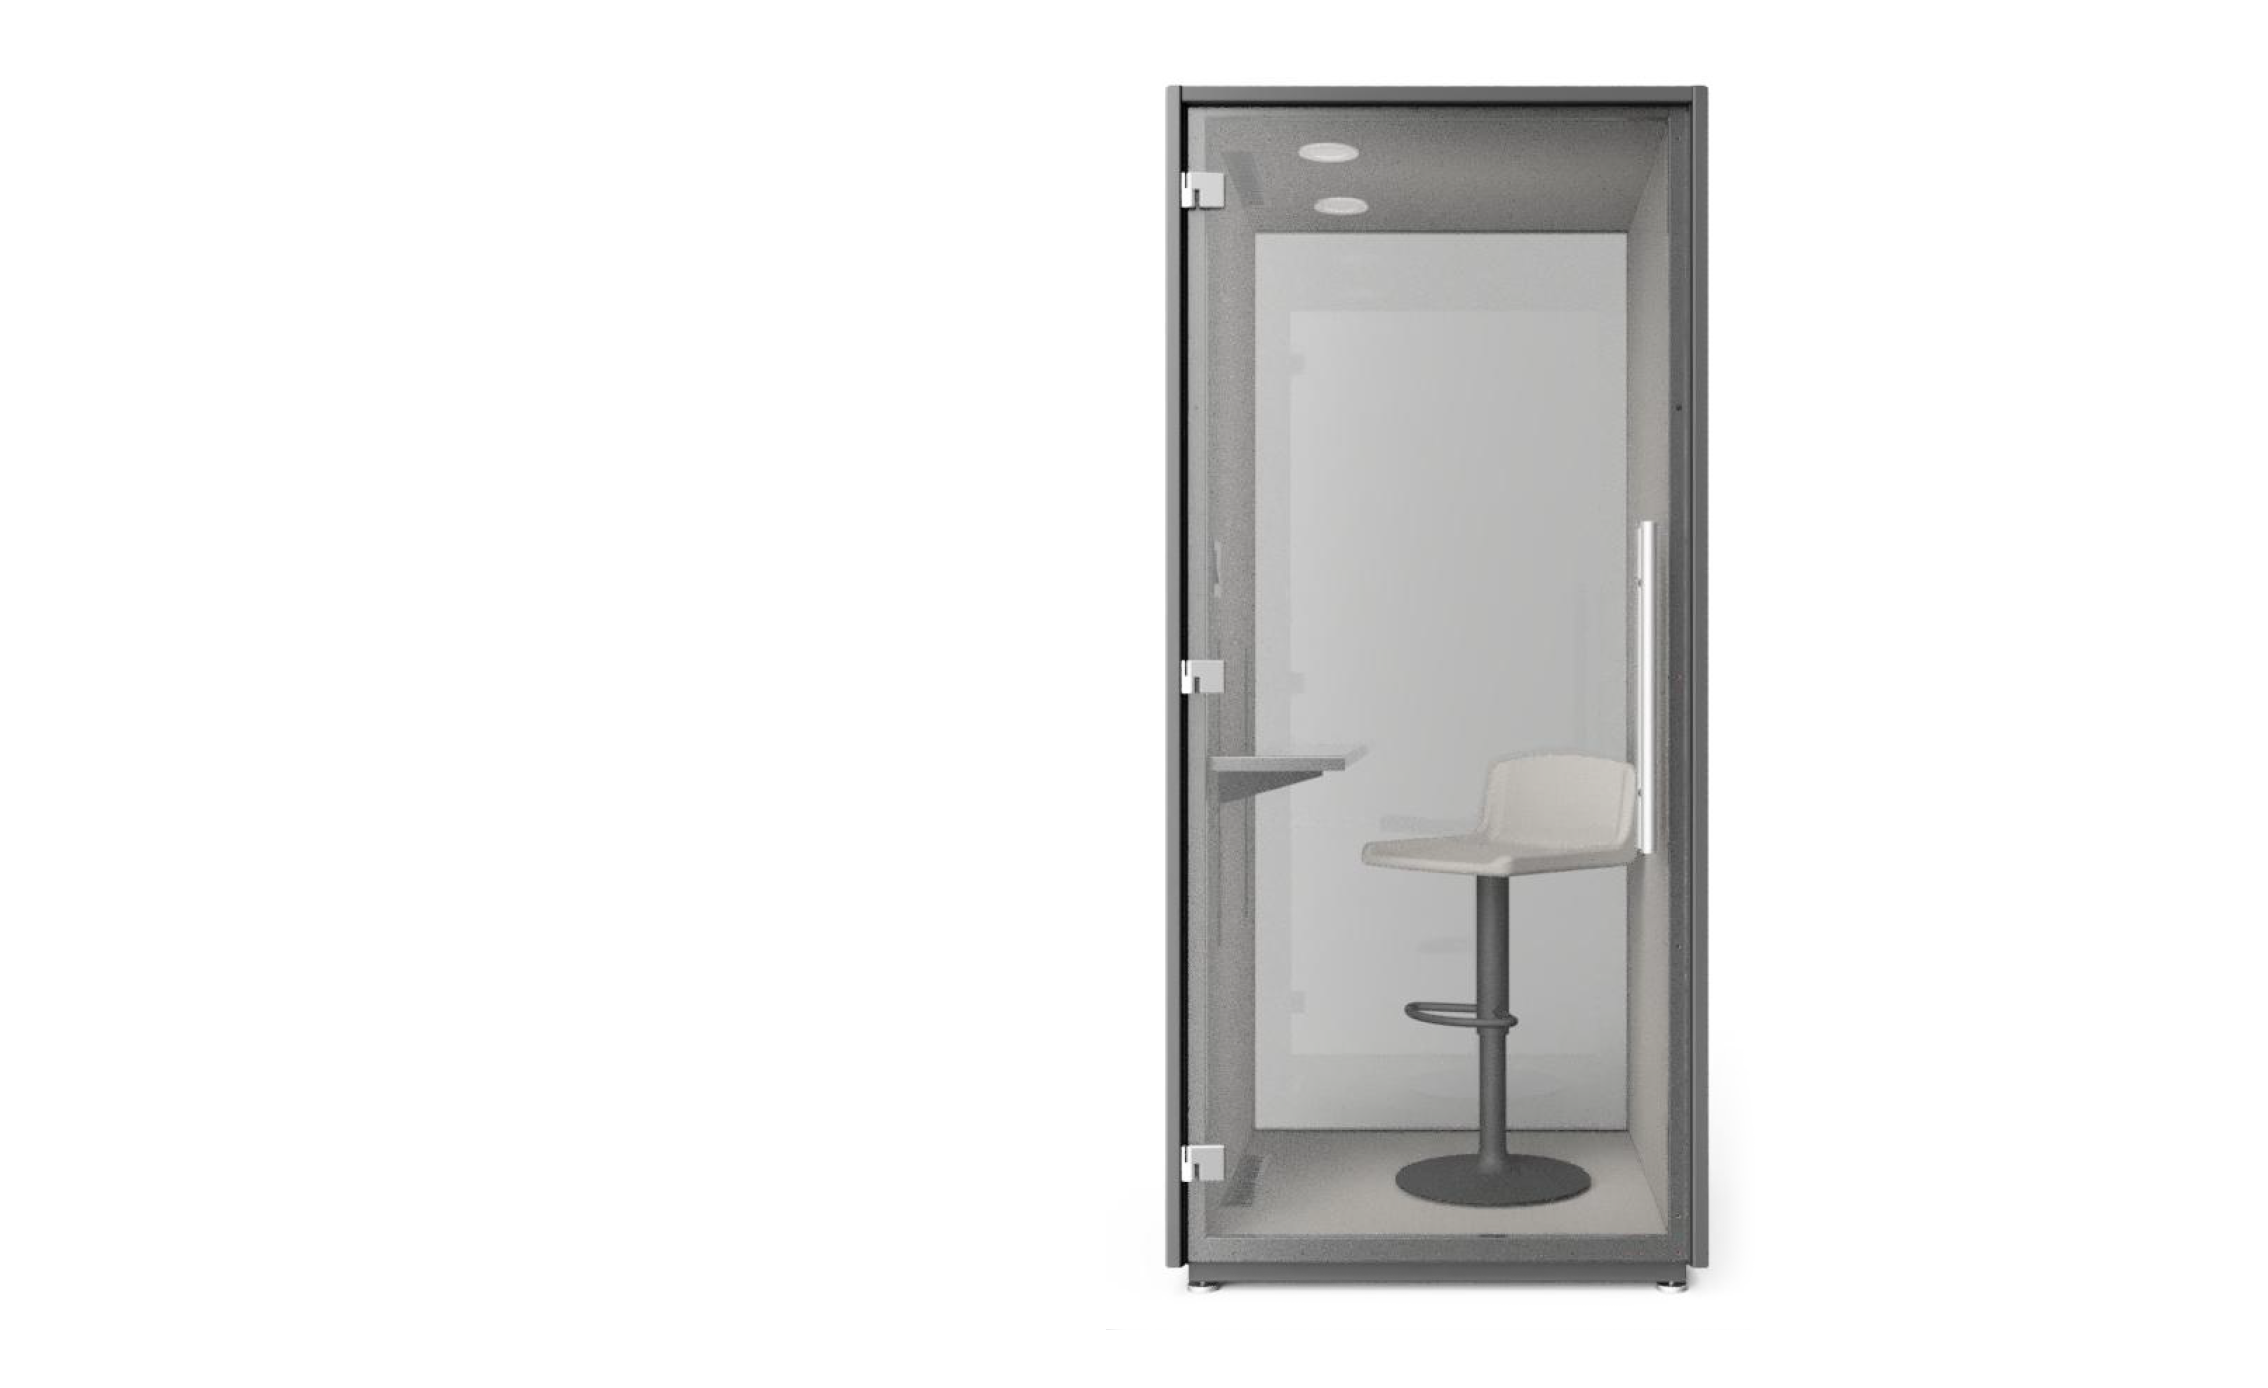 Mock up image of a modular privacy booth with a charcoal gray exterior and a front glass panel door. Inside the booth is a small adjustable work surface, a pedestal chair, overhead LED lighting and walls lined with a light grey felt fabric. 